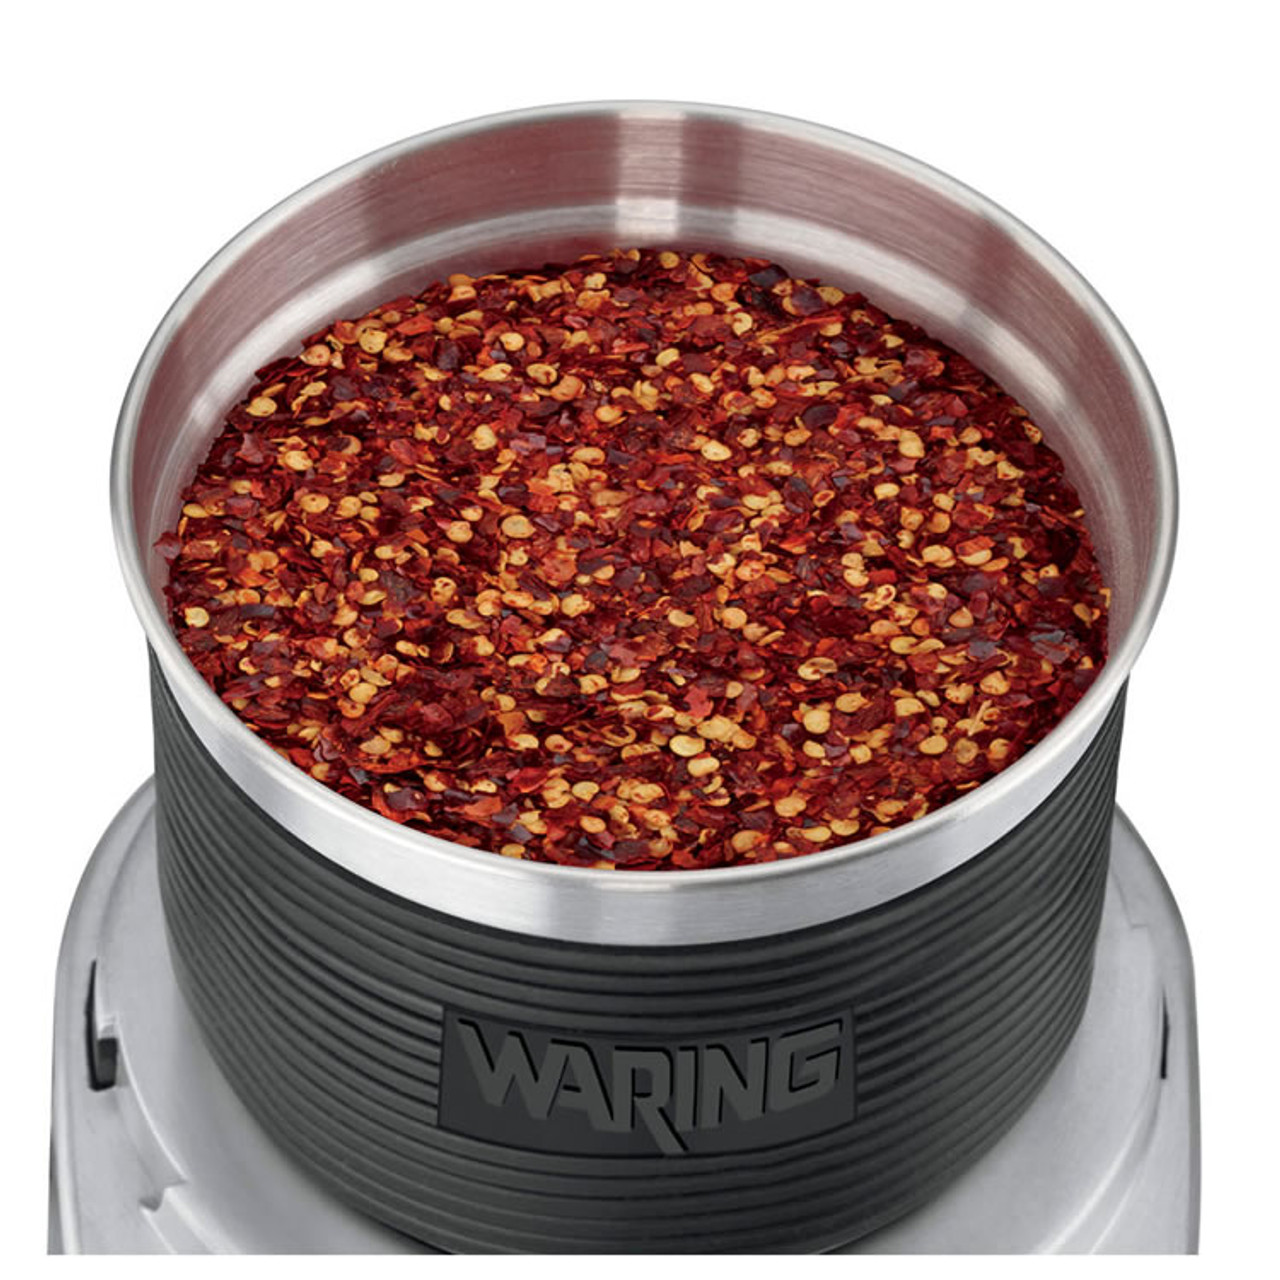 Waring 3-Cup Electric Wet / Dry Spice Grinder - 6 1/2L x 7 1/2W